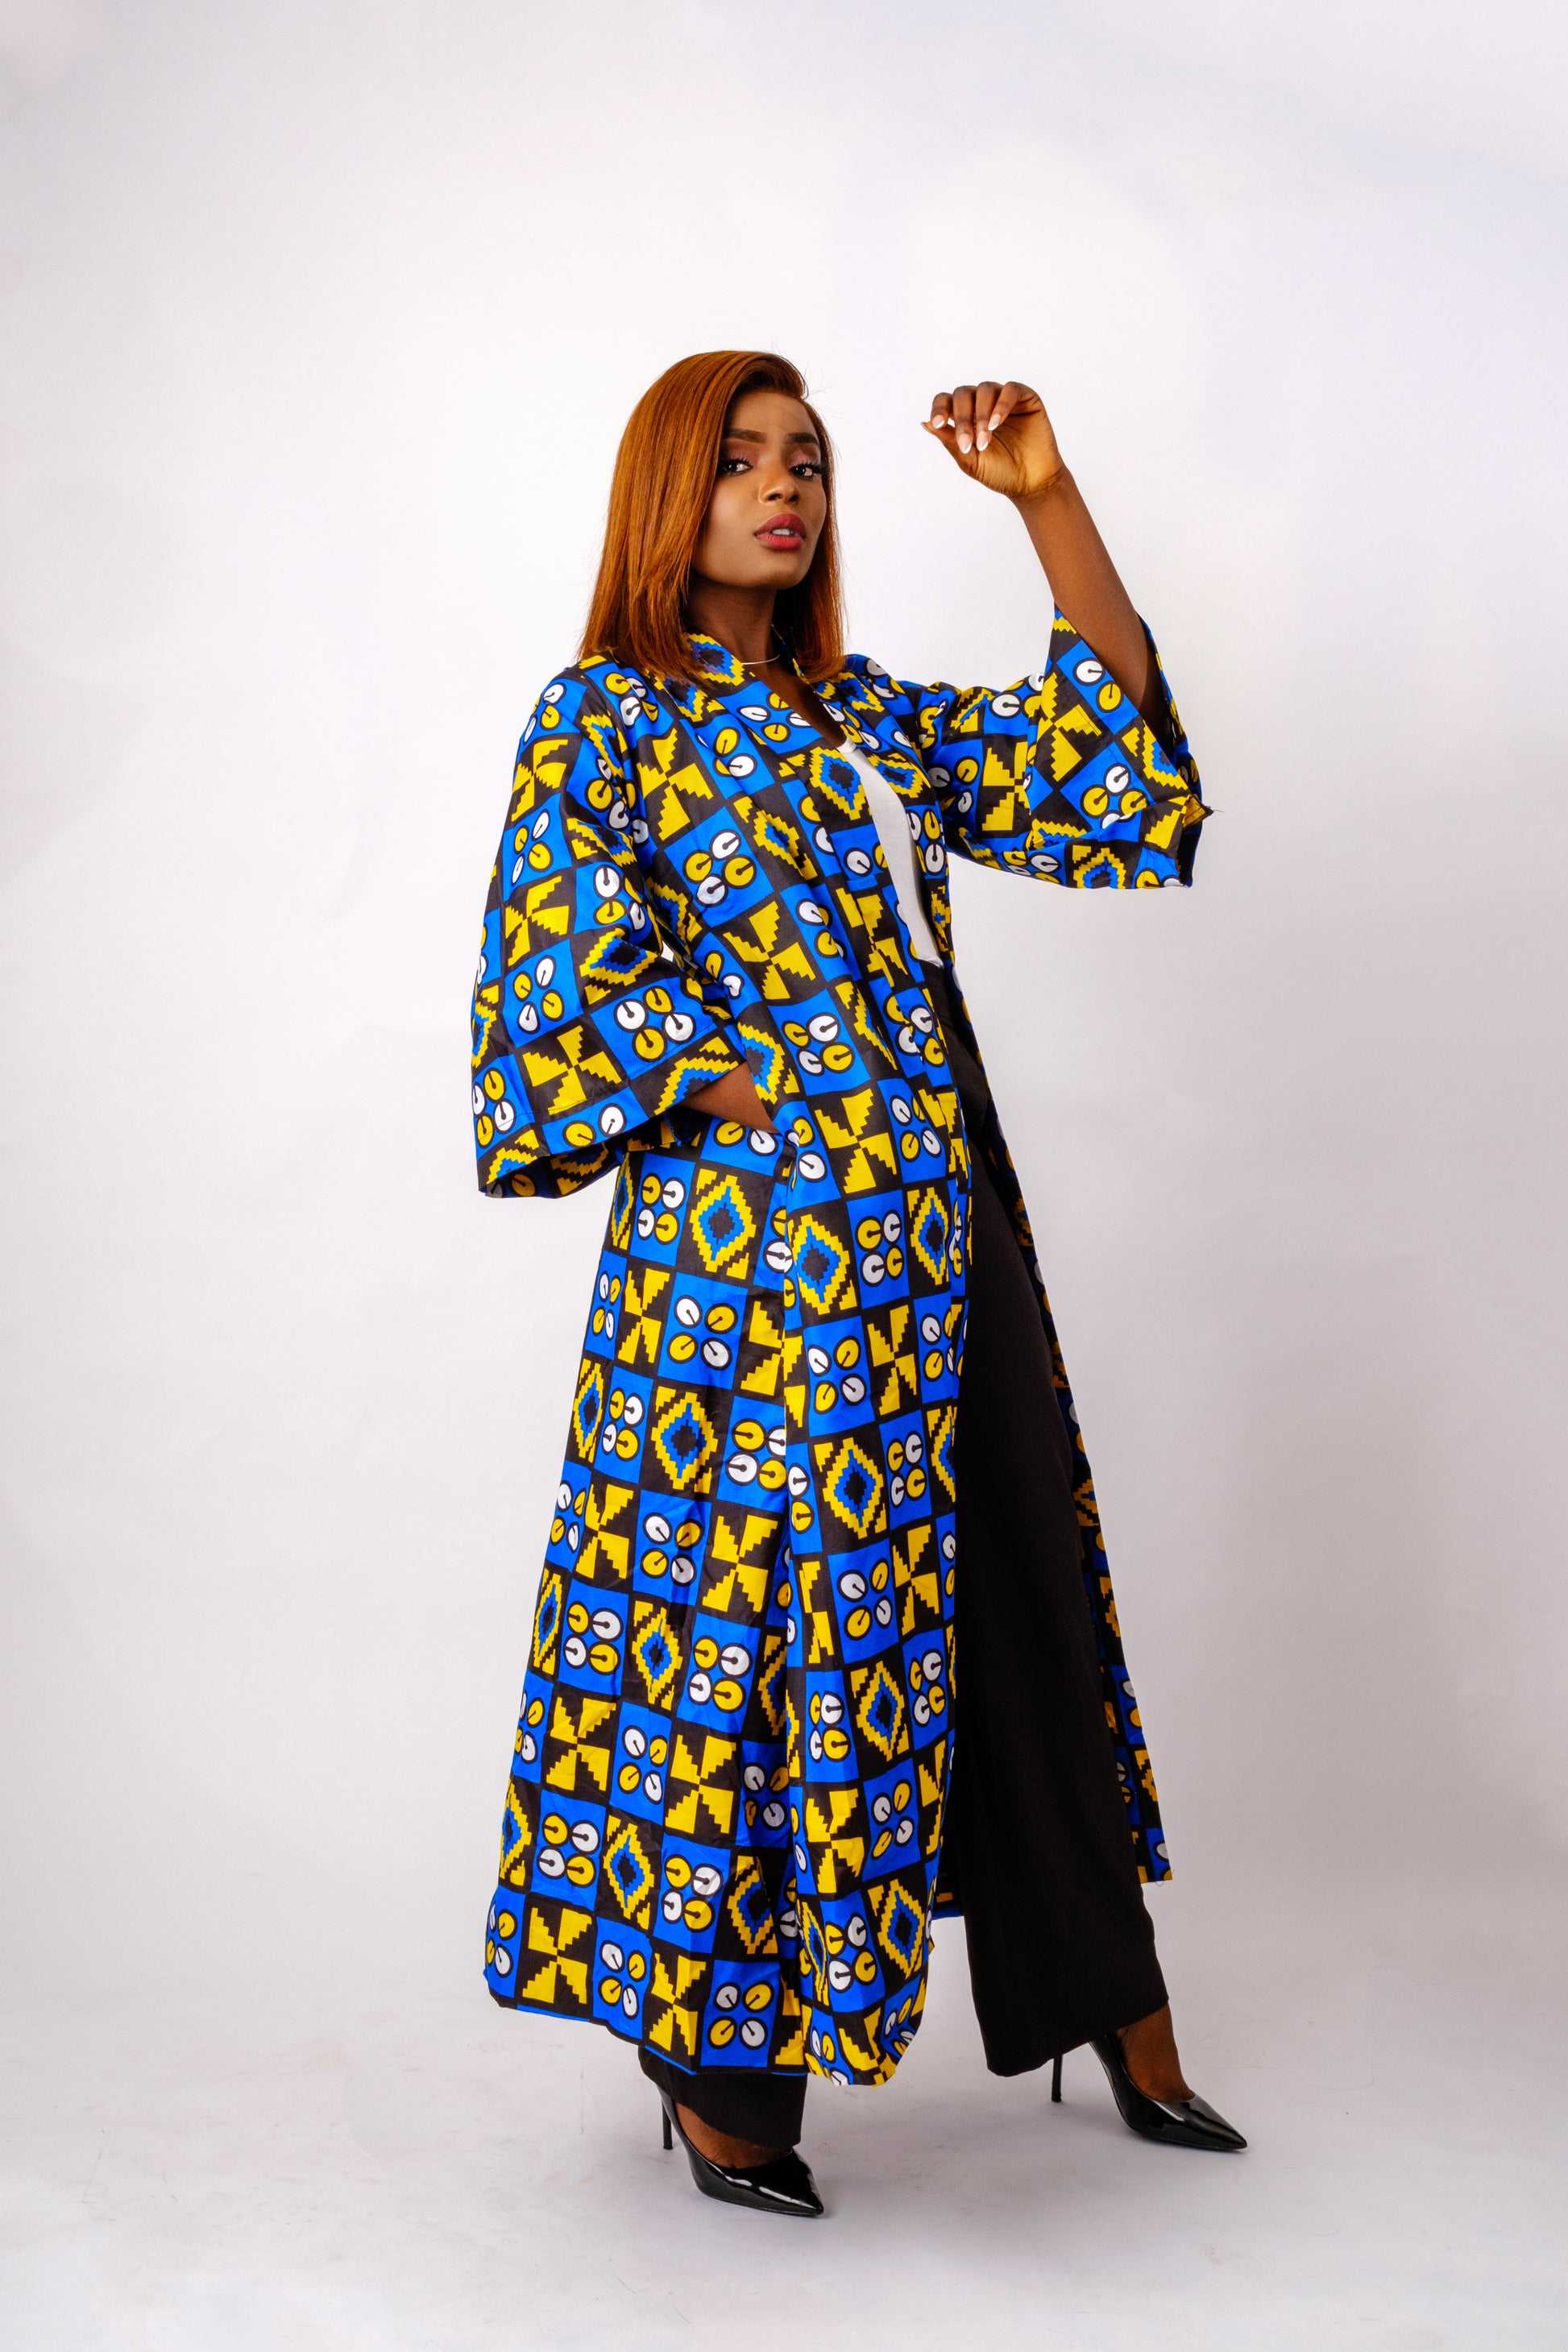 Blue African print (Ankara) kimono made of a lightweight cotton material that features a mix of geometric tribal designs